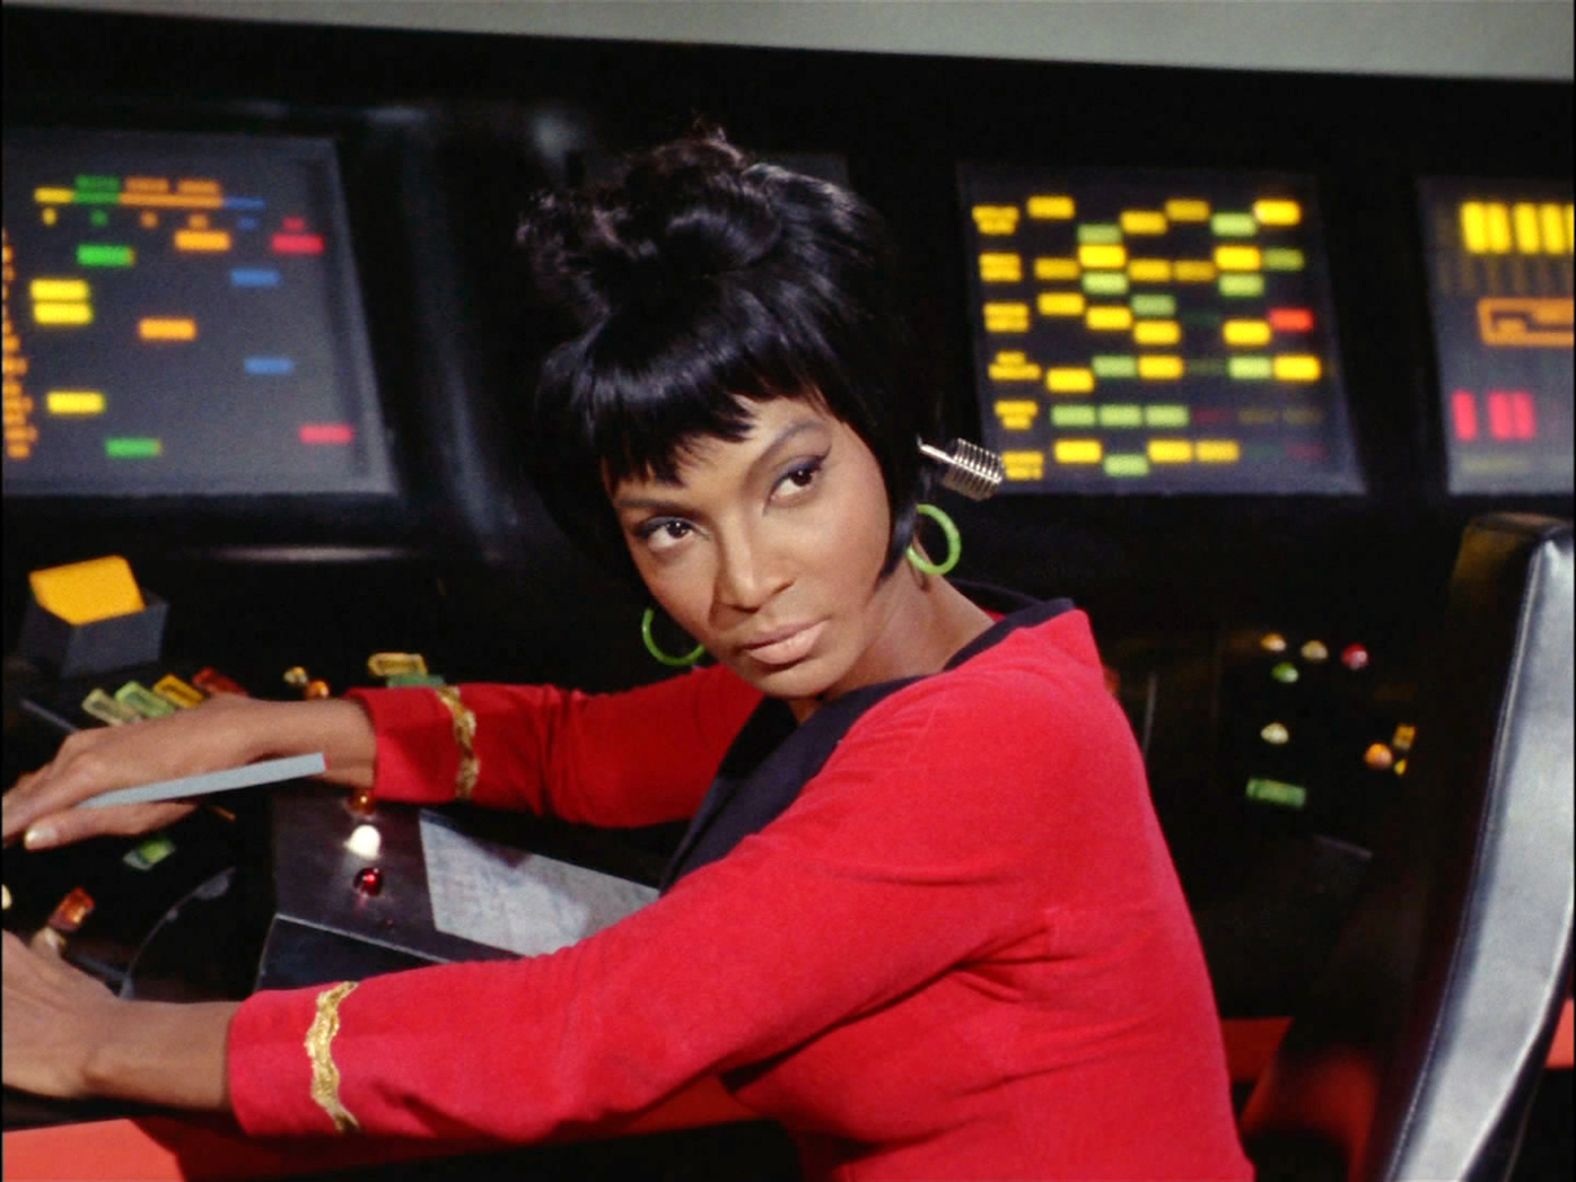 Actress and singer <a href="index.php?page=&url=https%3A%2F%2Fwww.cnn.com%2F2022%2F07%2F31%2Fentertainment%2Fnichelle-nichols-star-trek-dies%2Findex.html" target="_blank">Nichelle Nichols,</a> best known for her groundbreaking portrayal of Lt. Nyota Uhura in "Star Trek: The Original Series," died July 30 at the age of 89, according to a statement from her son, Kyle Johnson. When "Star Trek" began in 1966, Nichols was a television rarity: a Black woman in a notable role on a prime-time television series. There had been African-American women on TV before, but they often played domestic workers and had small roles; Nichols' Uhura was an integral part of the multicultural "Star Trek" crew.